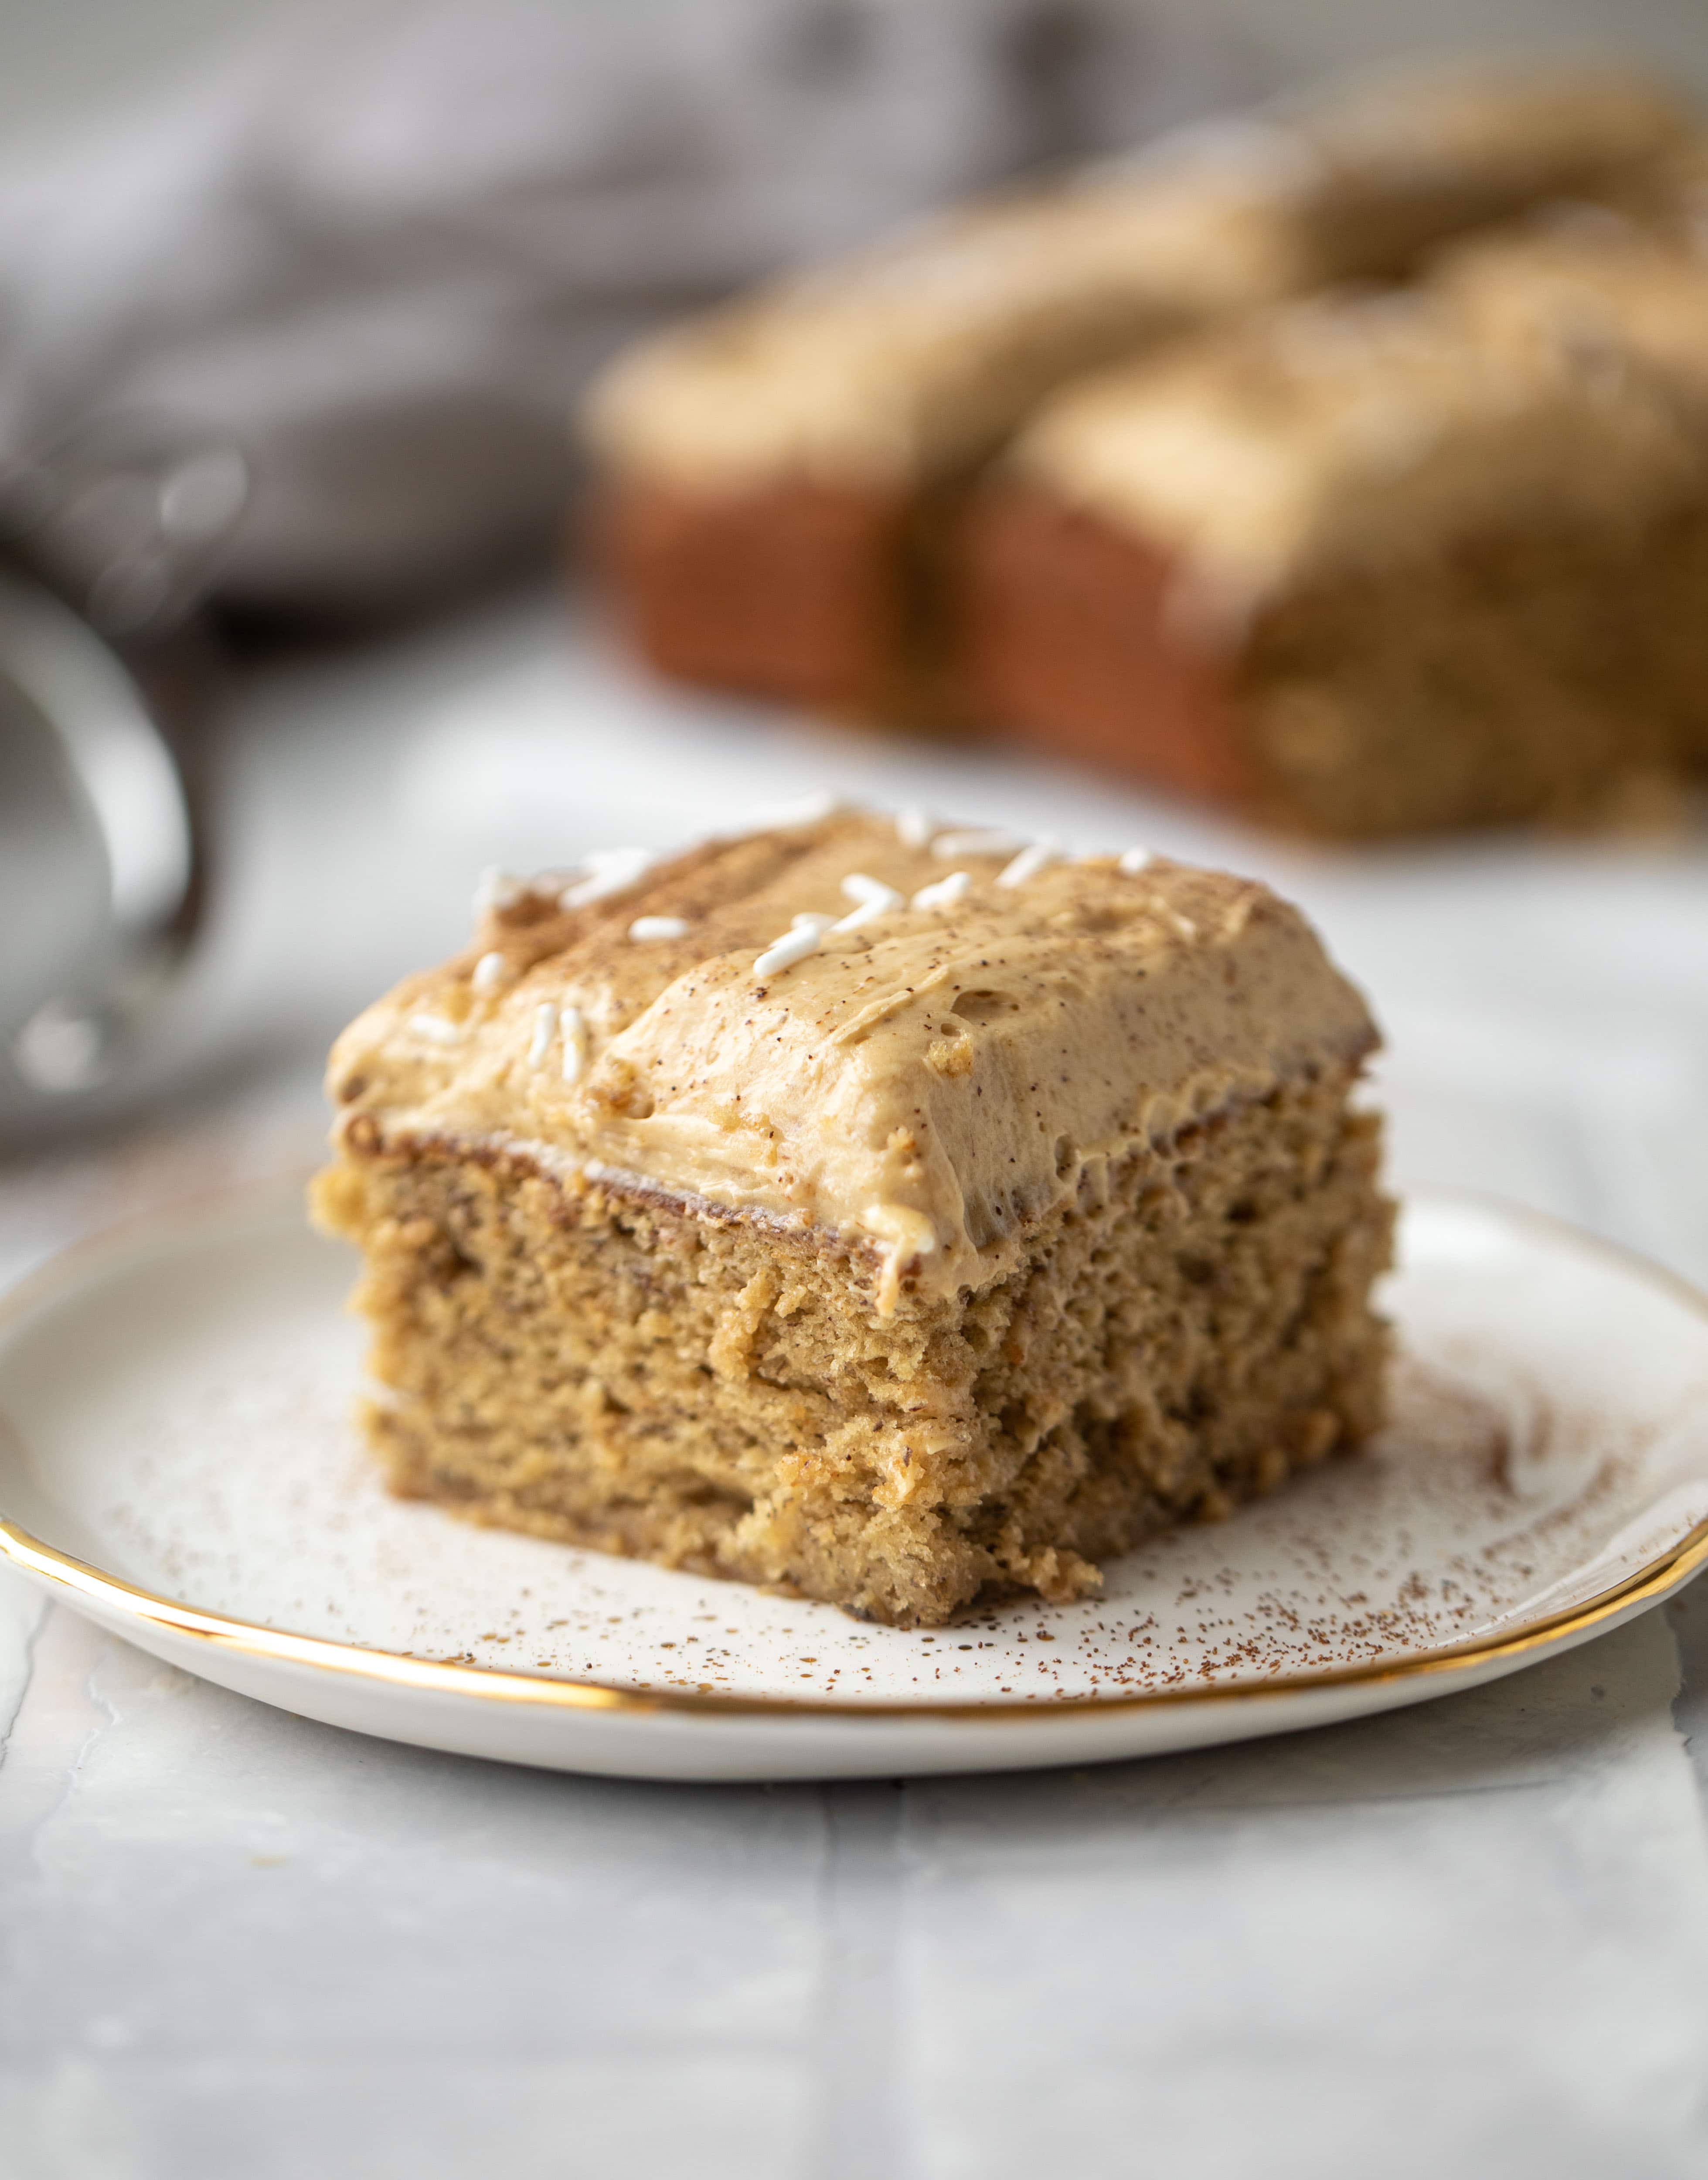 This banana cake is a delicious twist on banana bread! Covered with coffee cream cheese frosting, it’s an easy and wonderful treat.